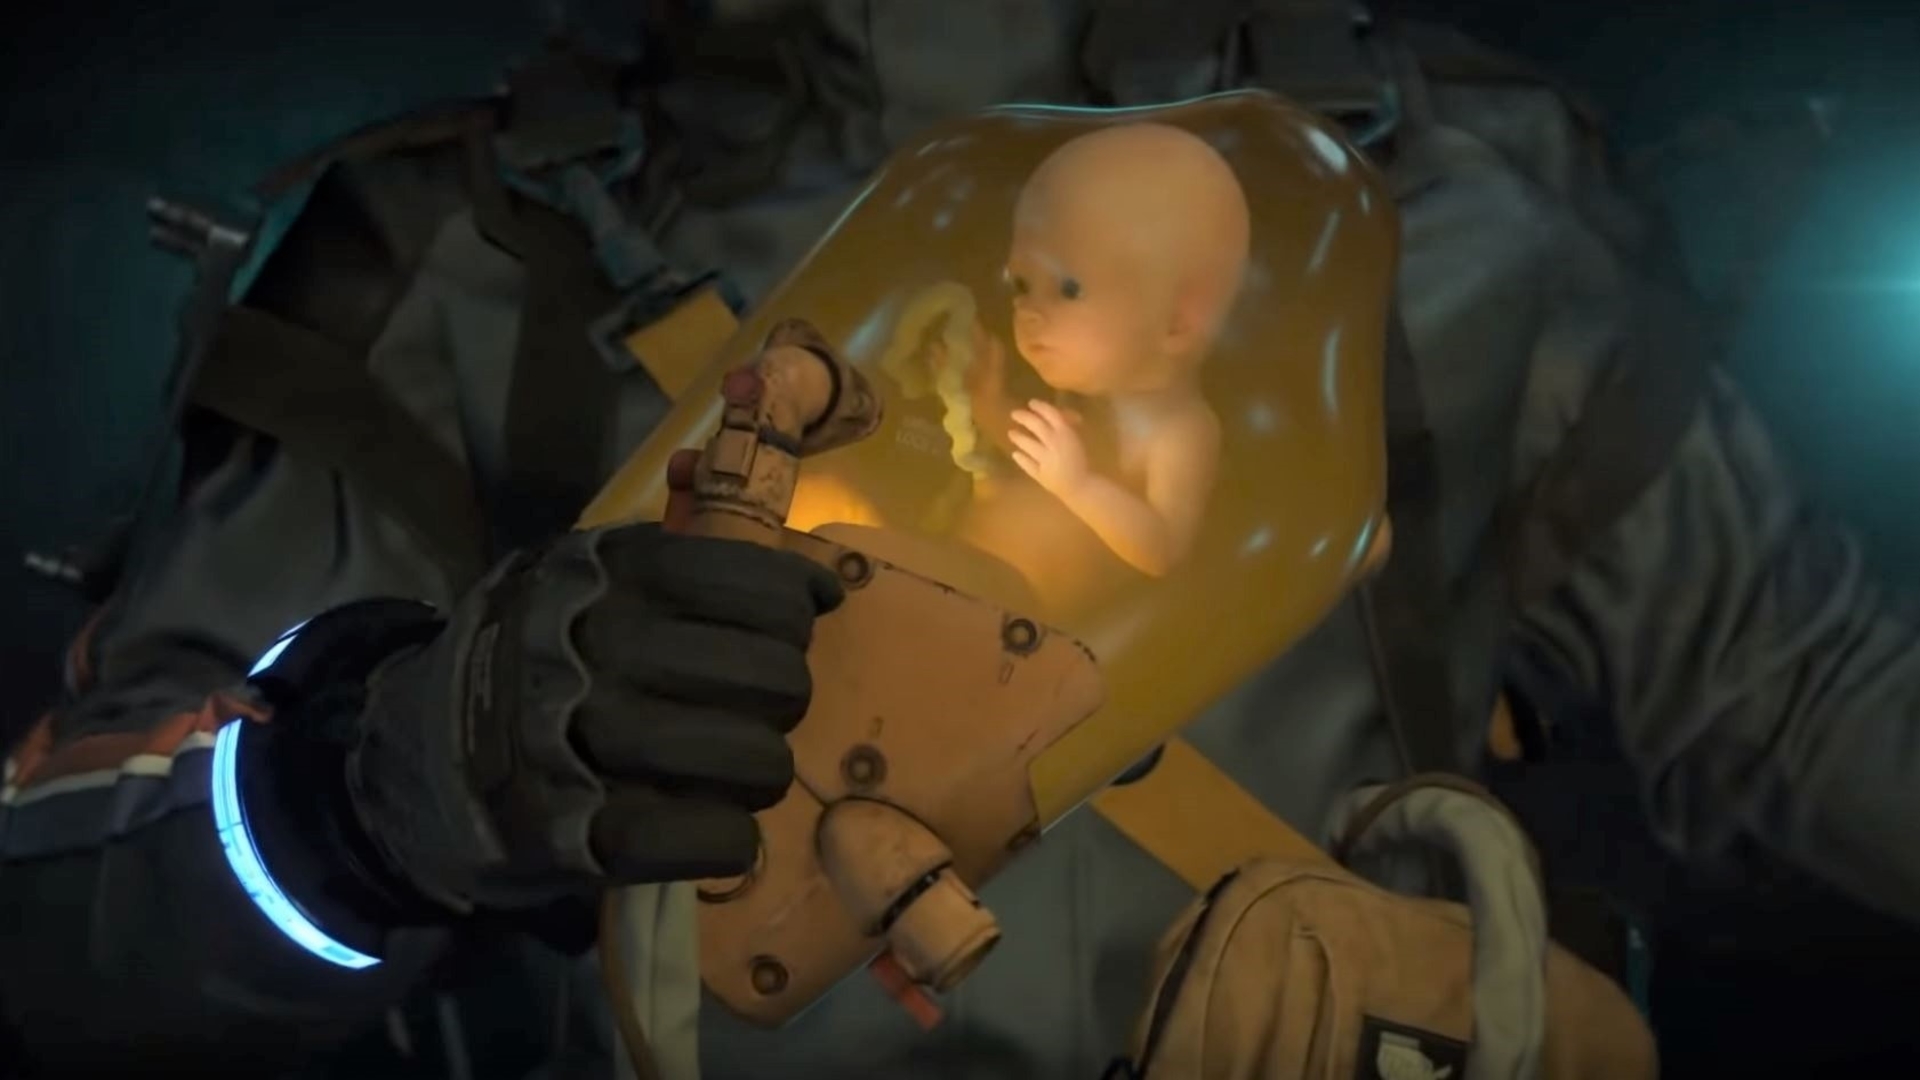 Death Stranding 2 is official and has an adorable new BB Boy